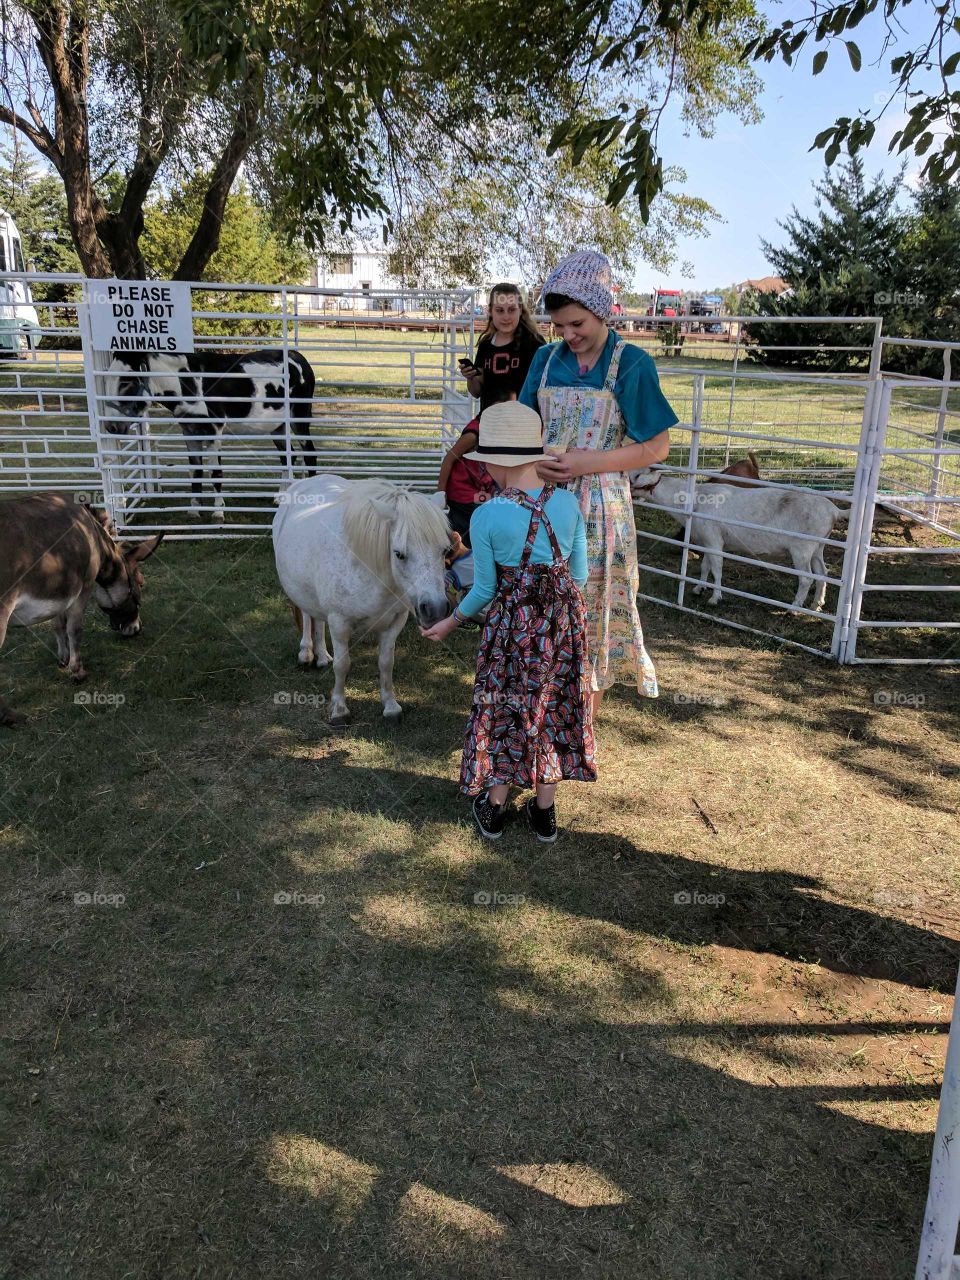 My two girls helping at a Kansas petting zoo for the Amish. Sunny, calm, kind, many.